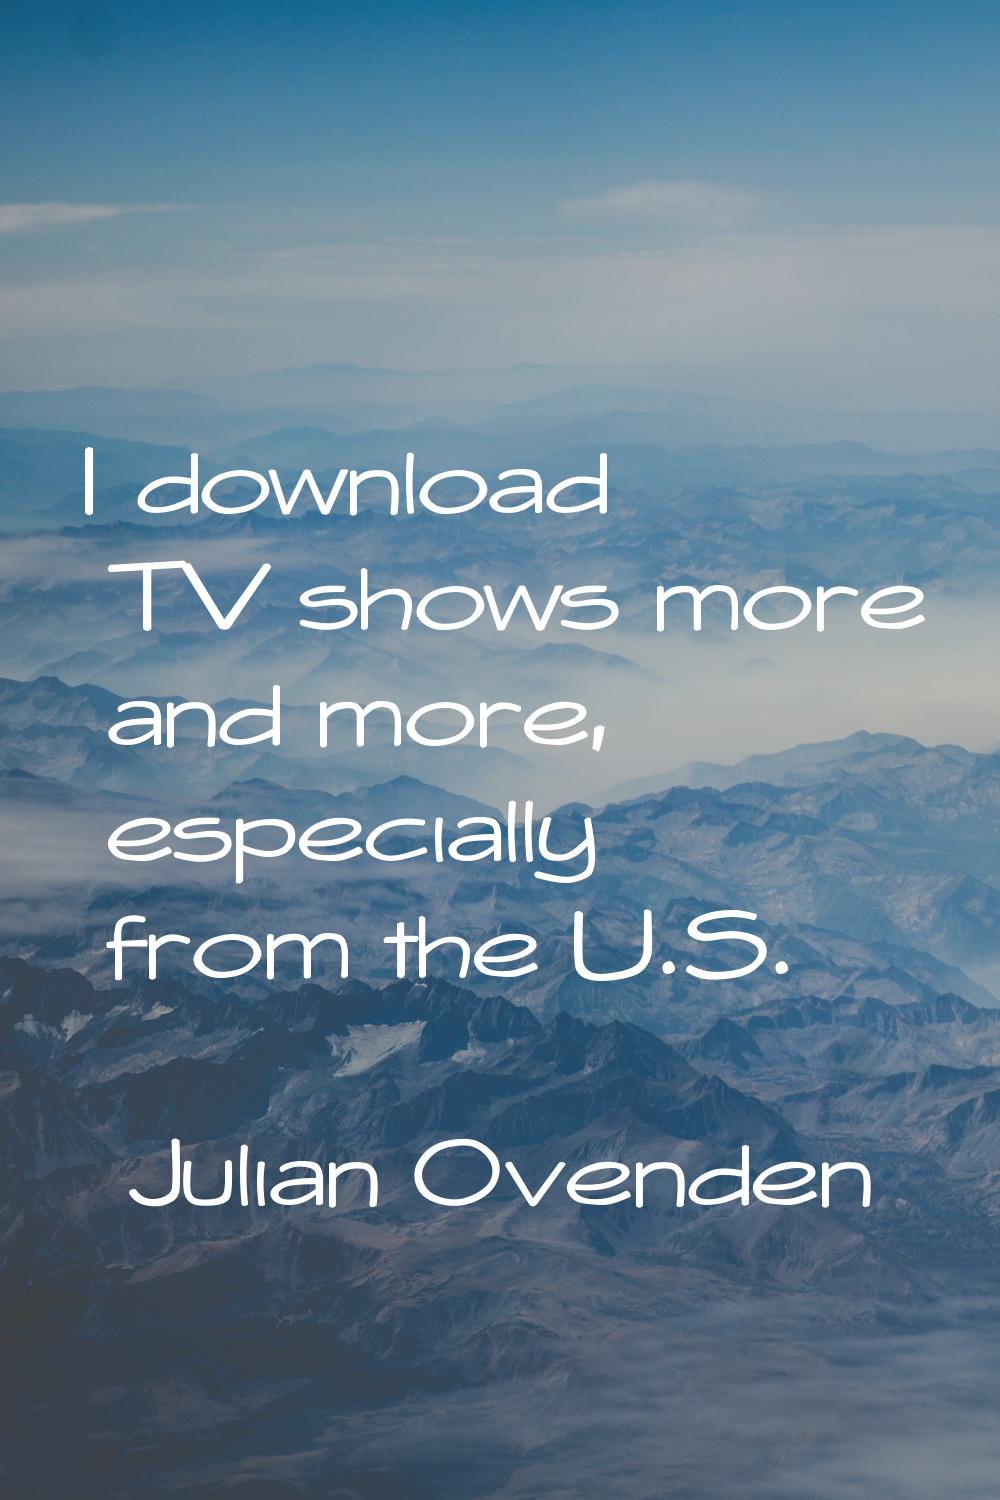 I download TV shows more and more, especially from the U.S.